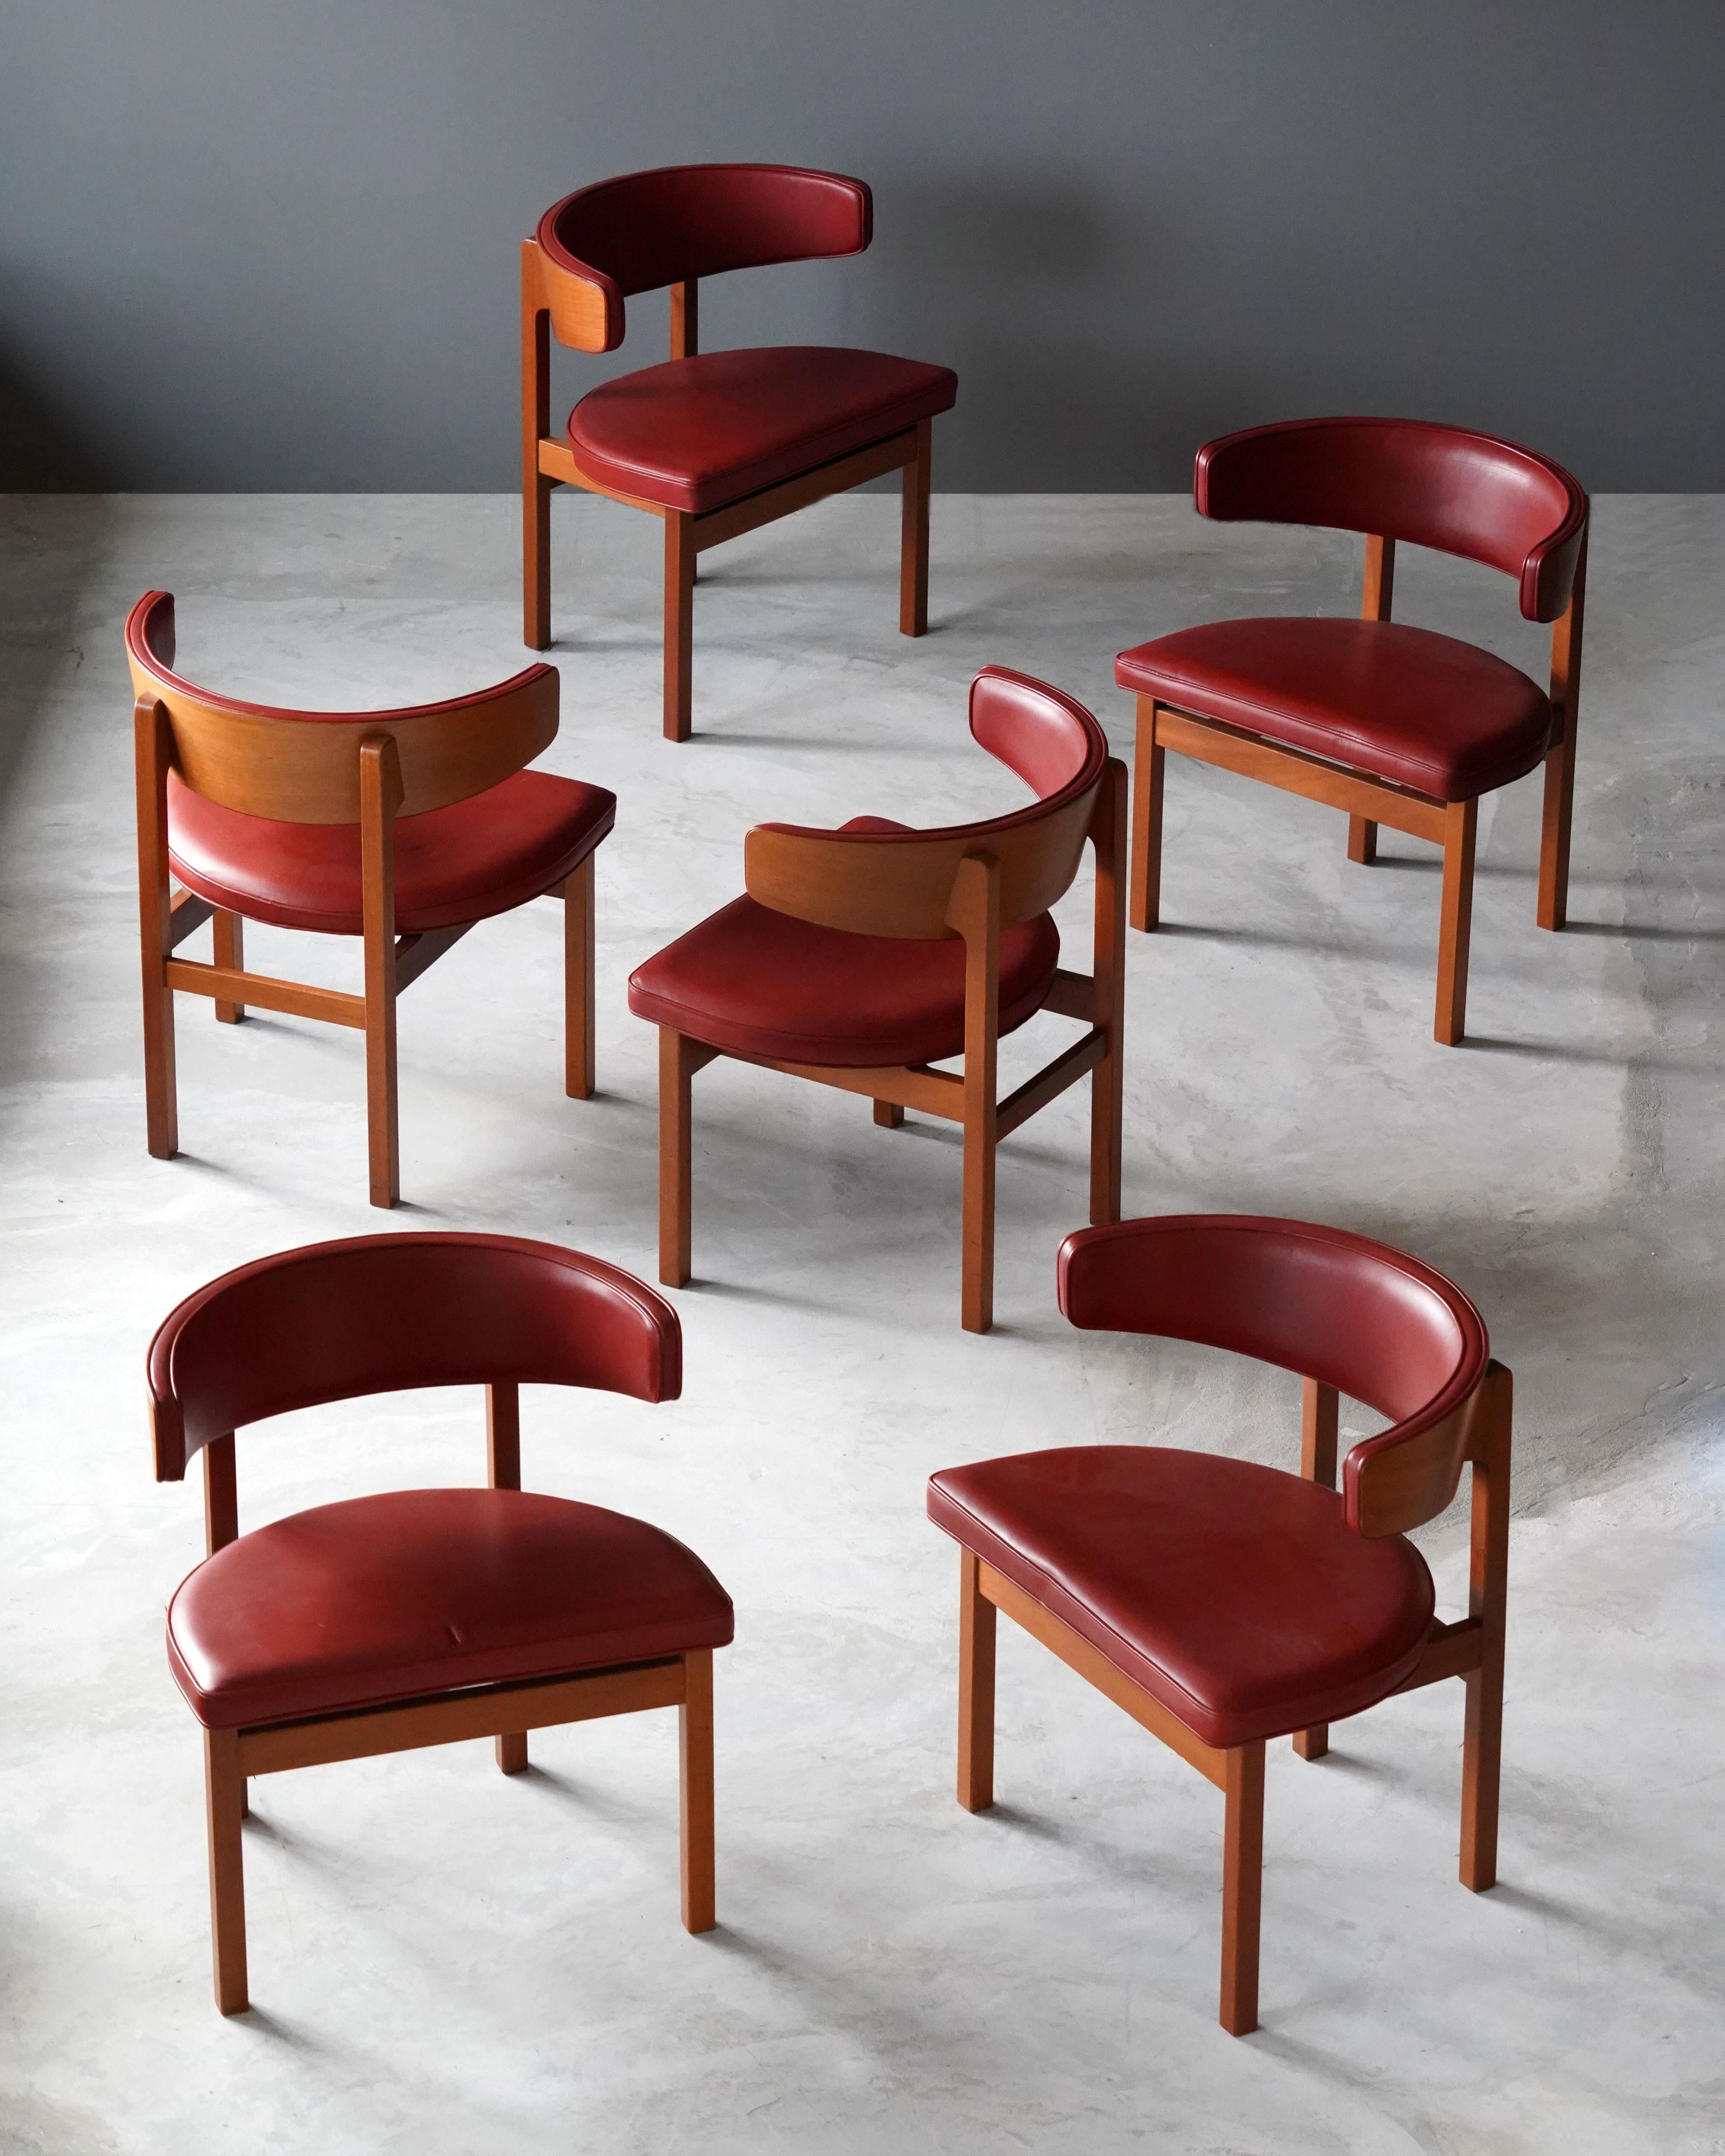 A set of 6 dining chairs / side chairs by Børge Mogensen. Designed by Børge Mogensen for Frederica Furniture, Denmark, 1960s. Labeled.

In original red leather, solid oak. 

Other designers of the period include Kaare Klint, Arne Jacobsen, Ole